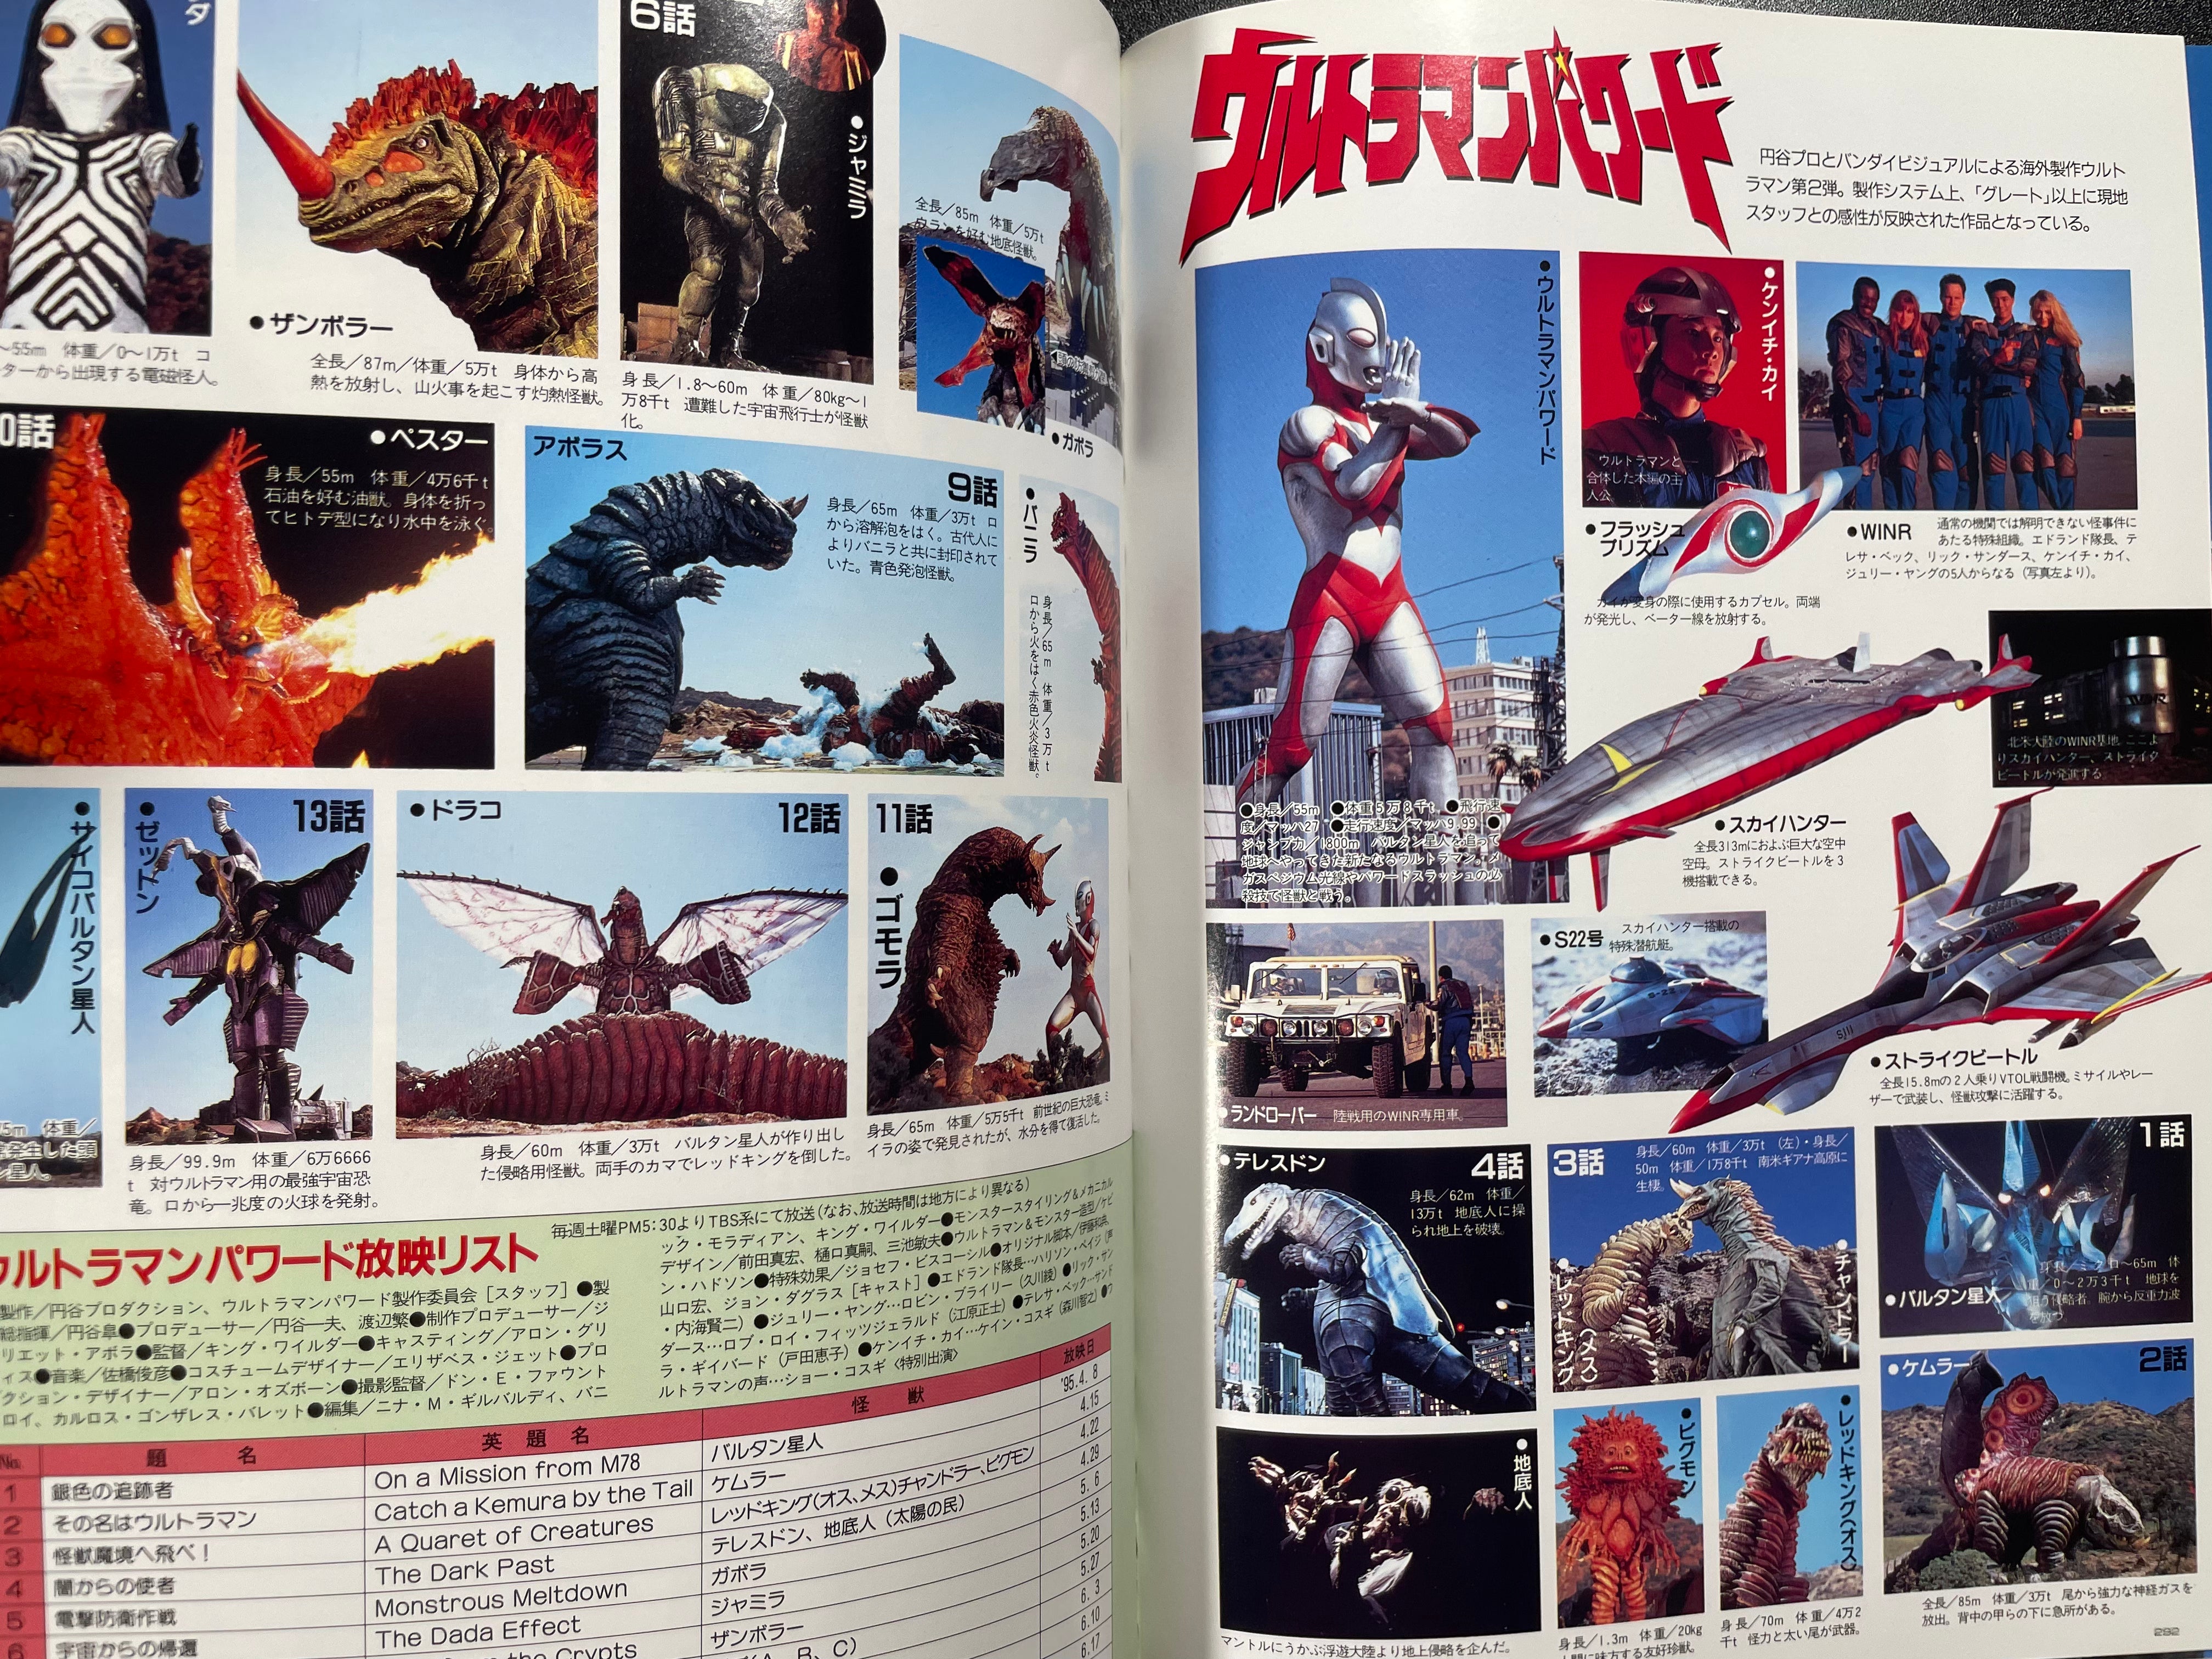 Ultraman White Paper The Complete Manual 4th Edition (1995)